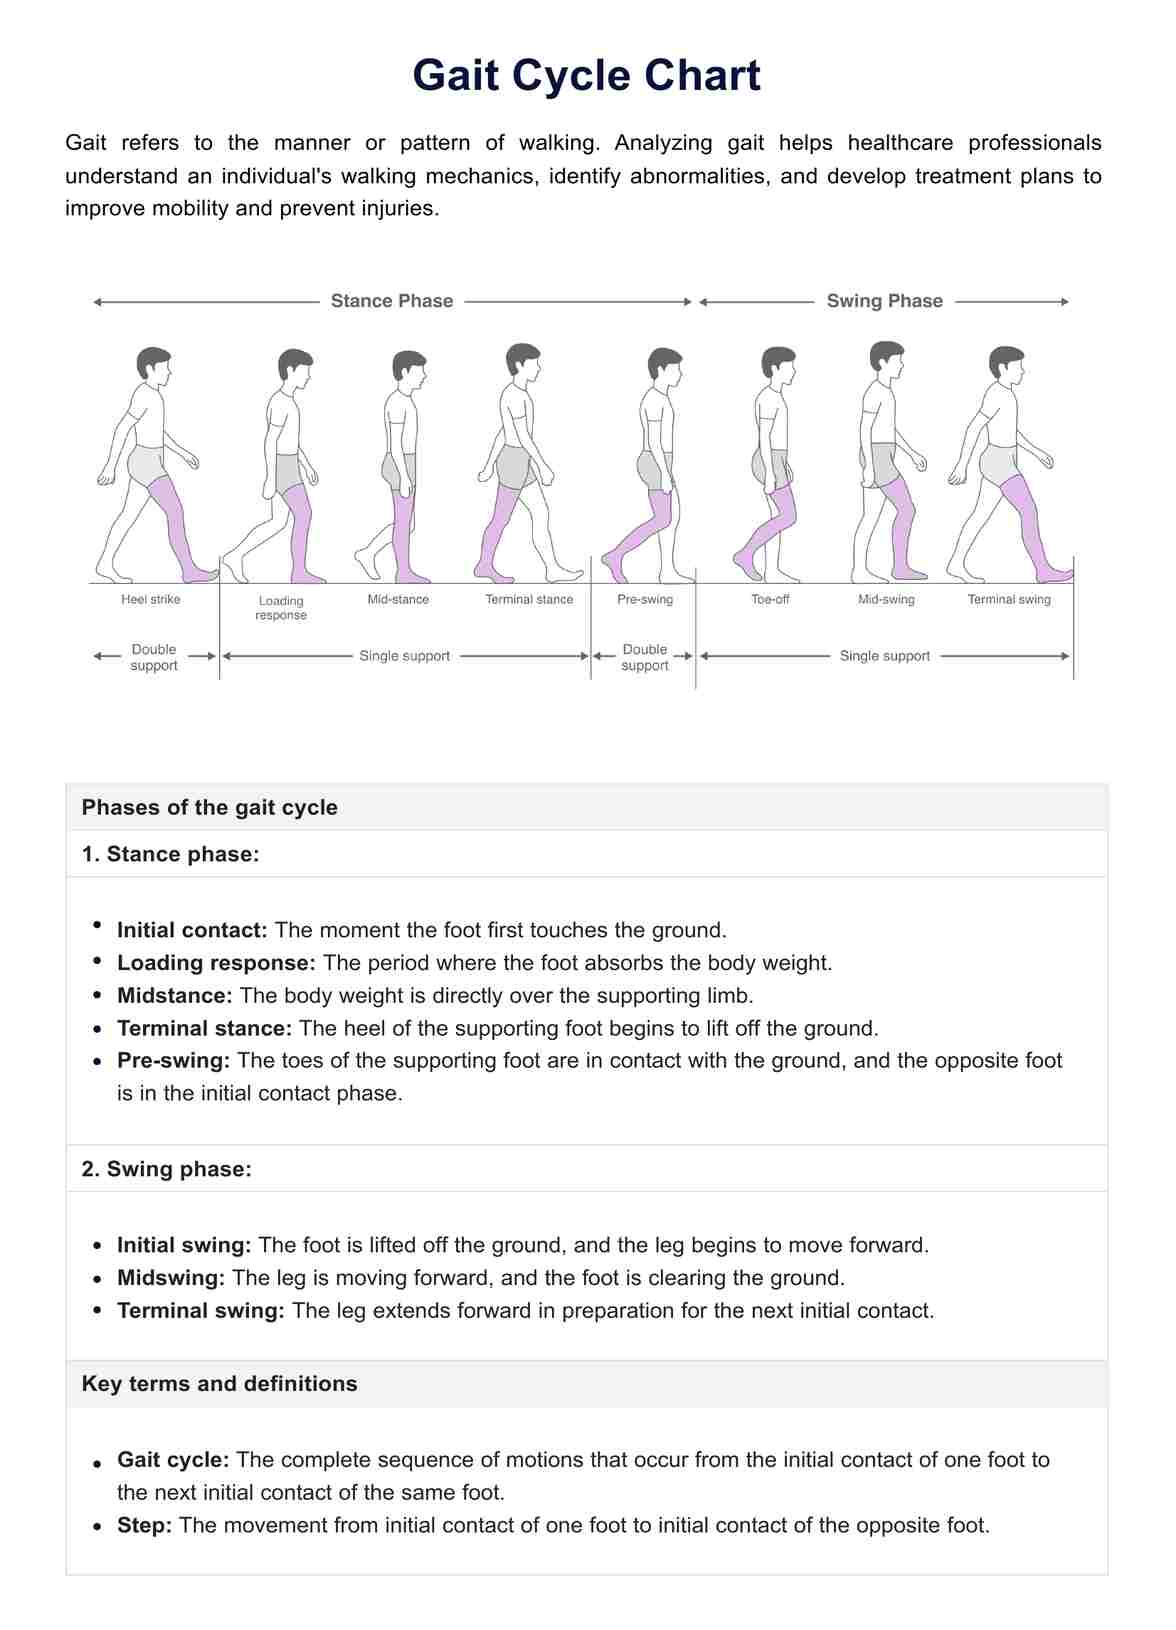 Gait Cycle Chart PDF Example